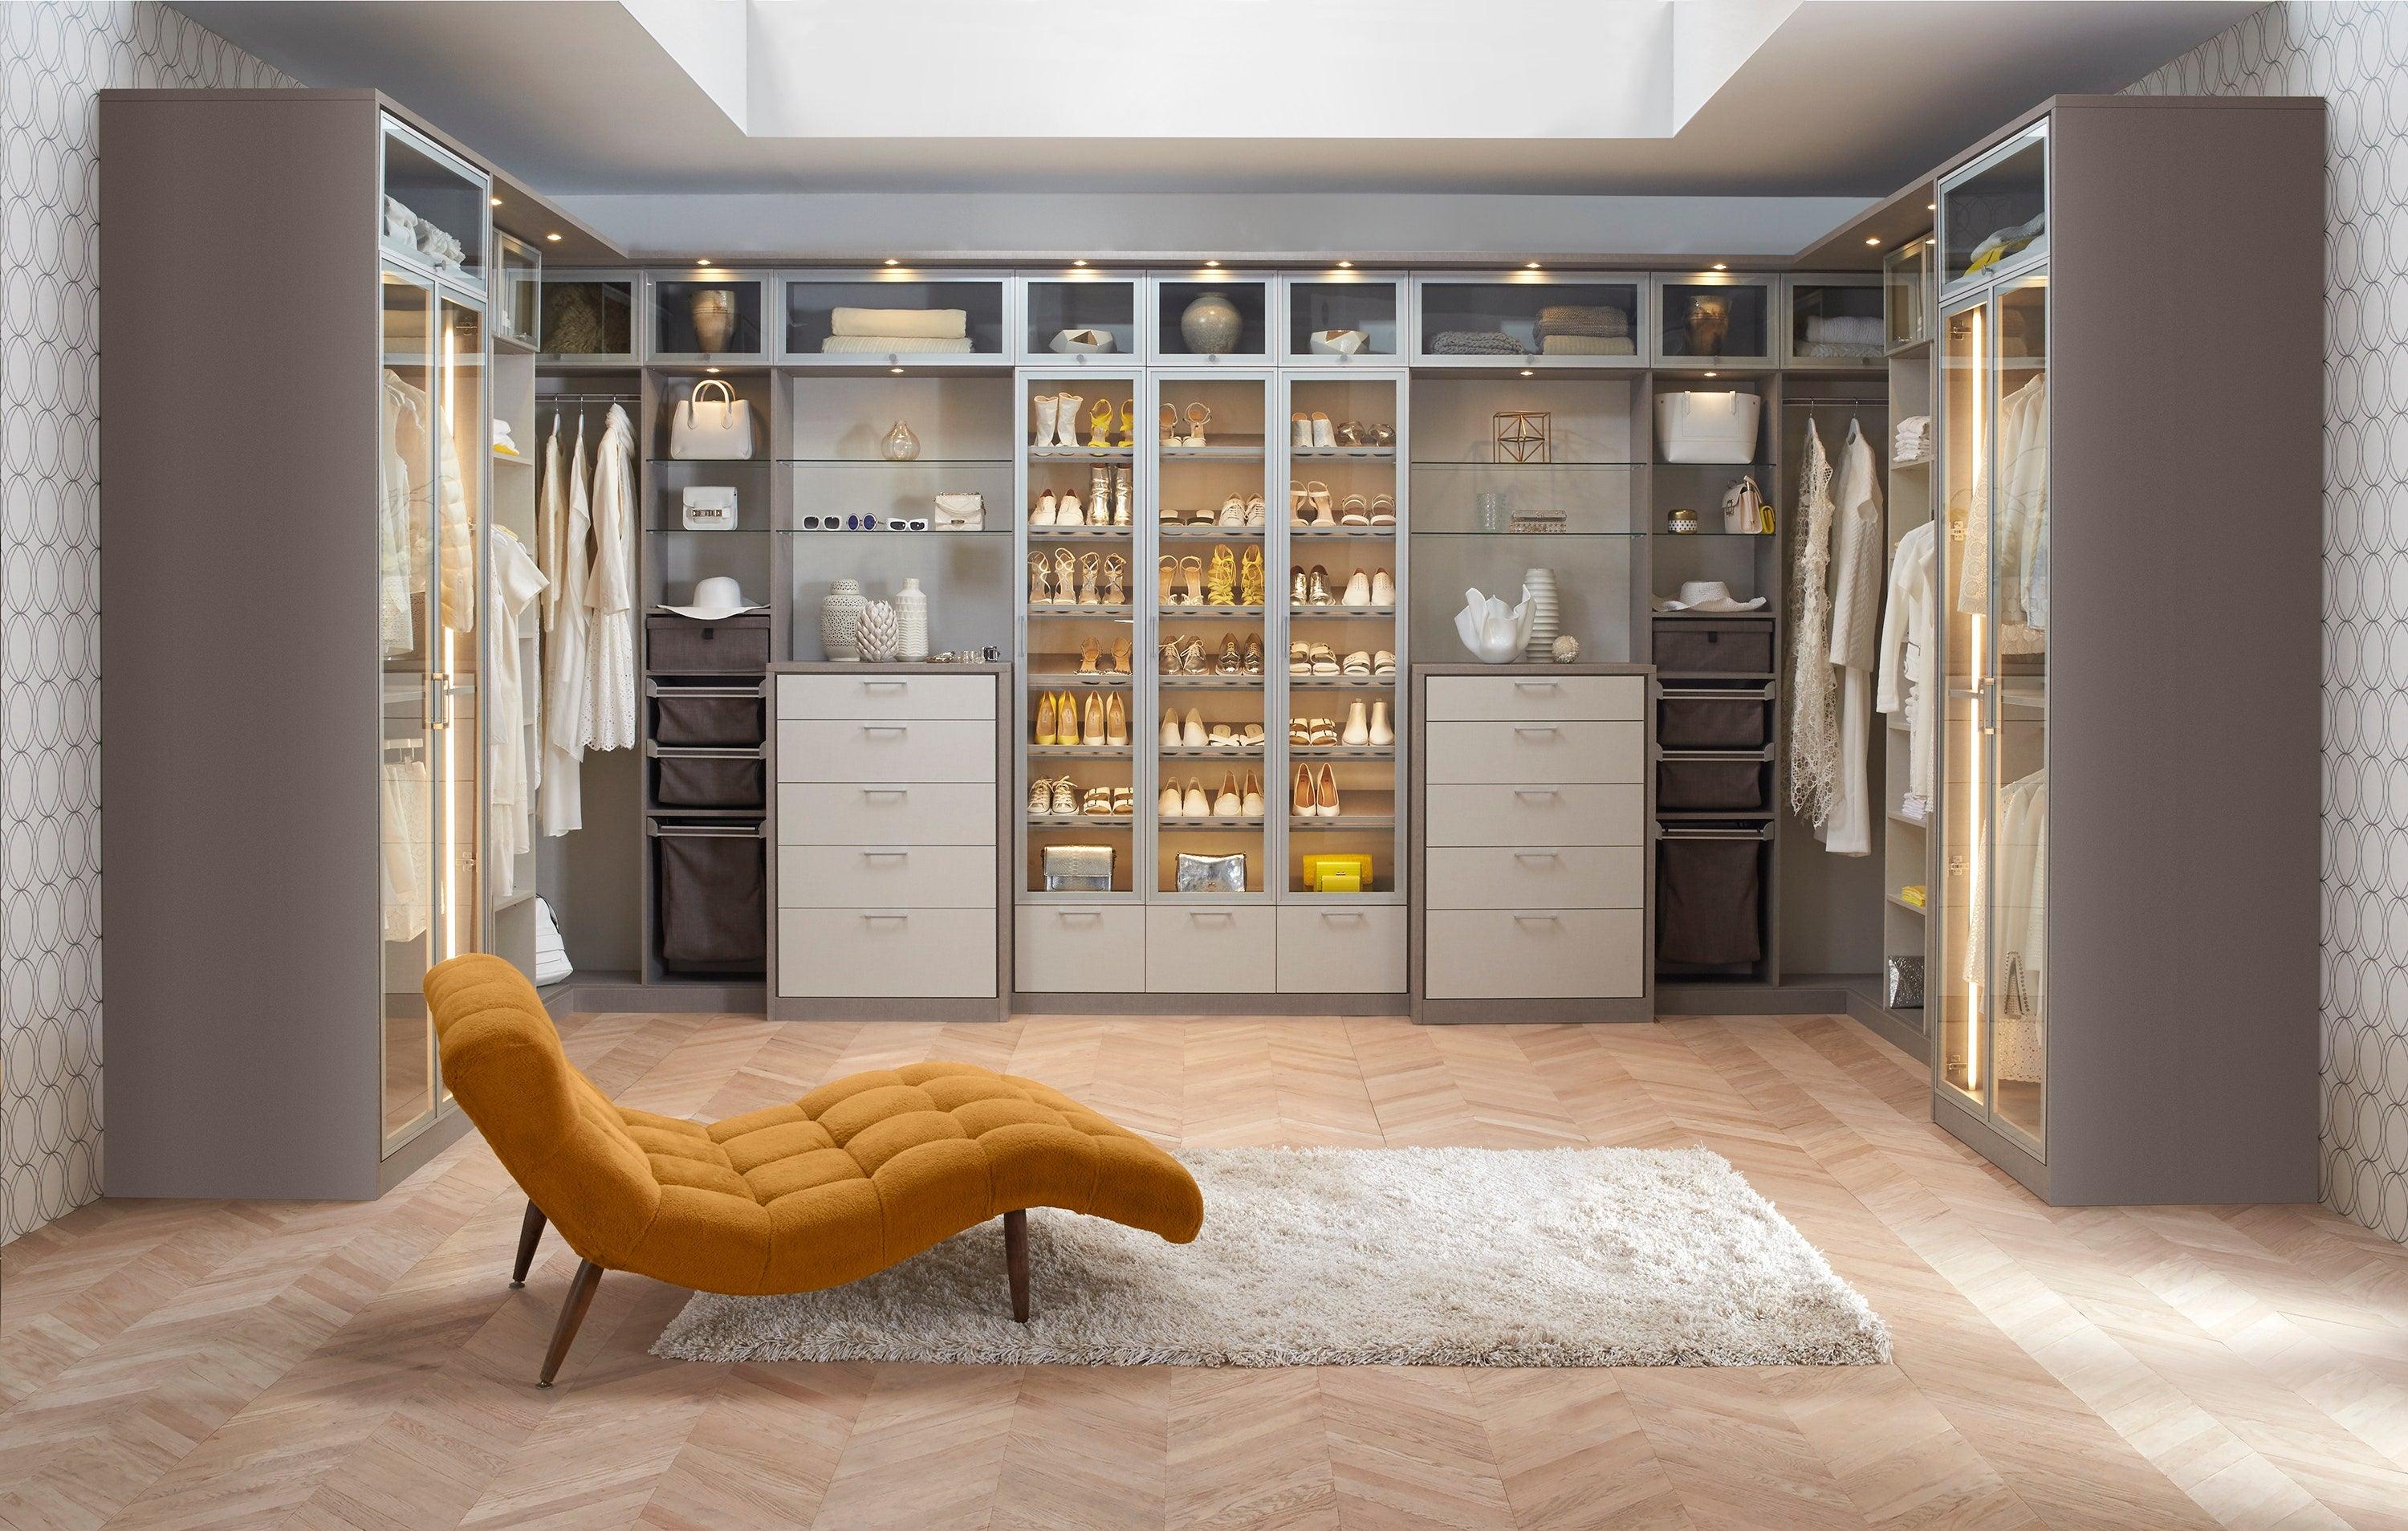 10 Ideas for Designing the Closet of Your Dreams